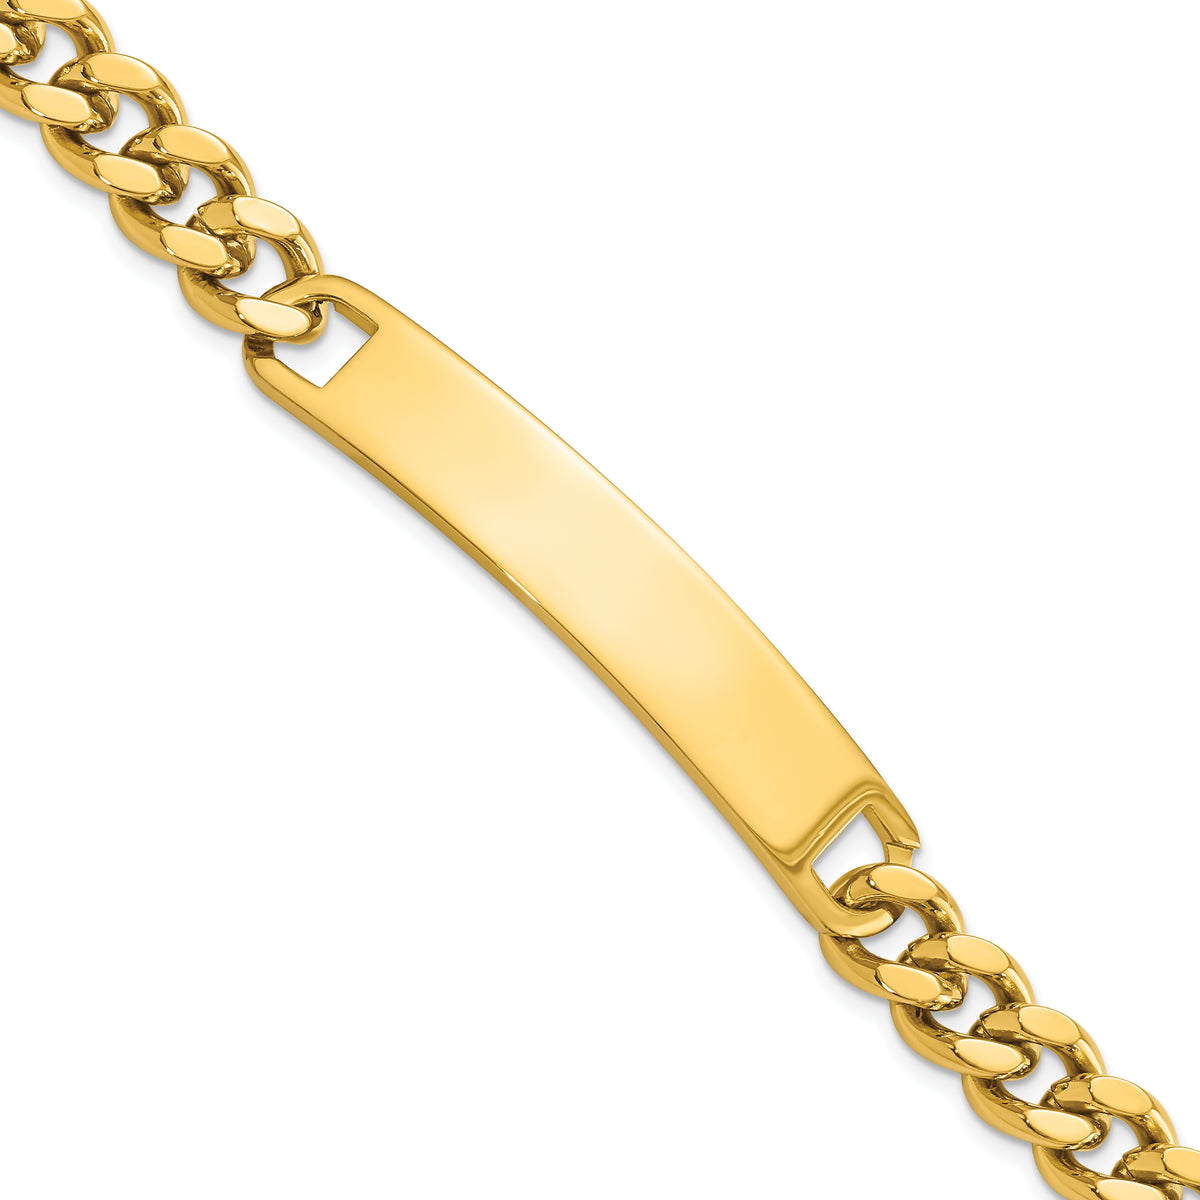 Kelly Waters Stainless Steel Yellow PVD Plated 8.25 inch Engravable ID Bracelet